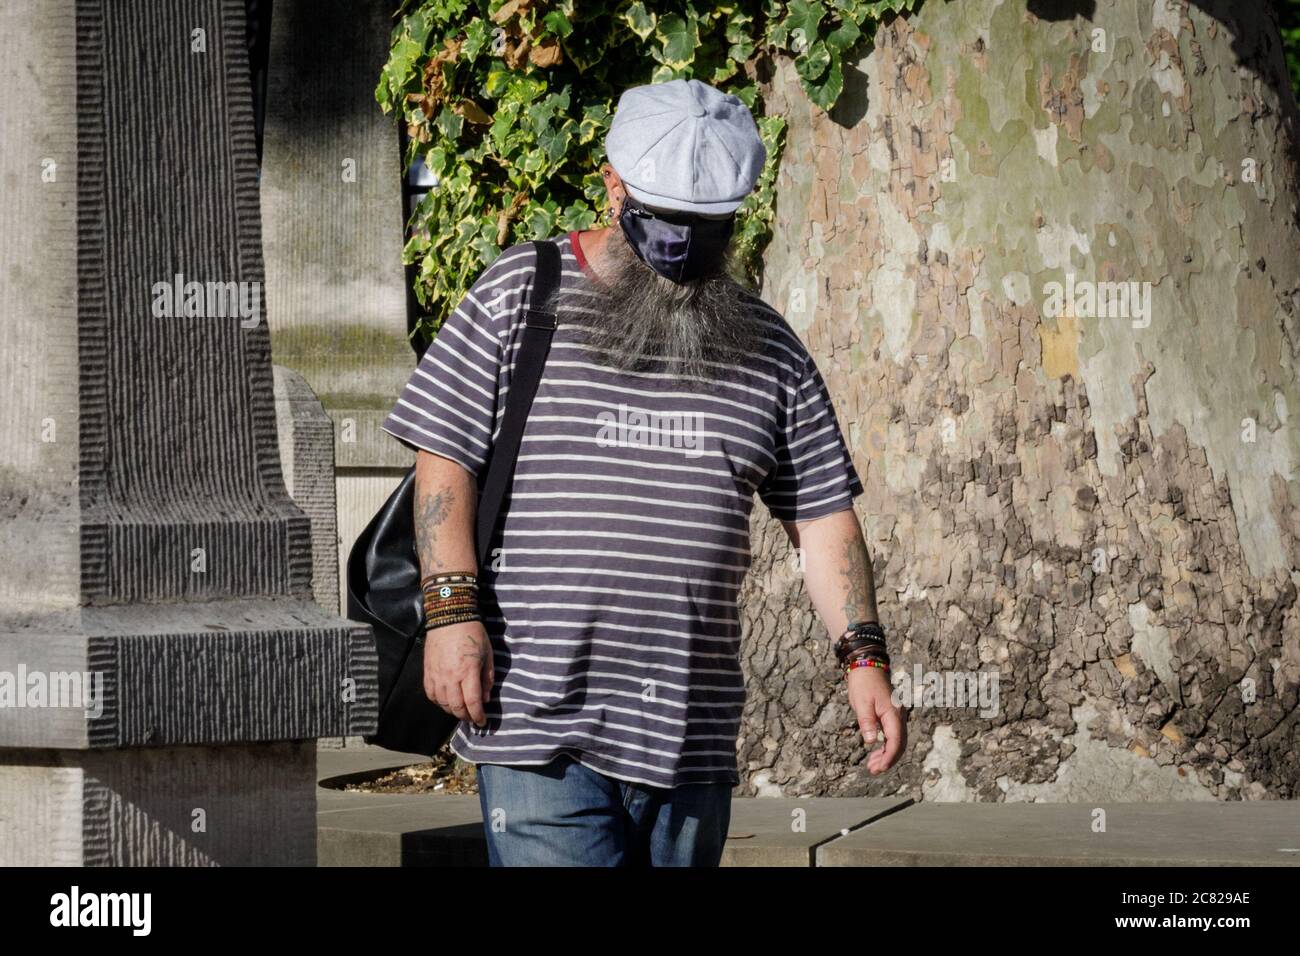 London, UK. 20th July, 2020. A man has chosen to wear his mask above a long, grey beard with an additional hat, leading to an unsusual but protective face covering and look. Face masks are becoming mandatory in more and more places in the UK and a more common sight on the streets of London. Credit: Imageplotter/Alamy Live News Stock Photo